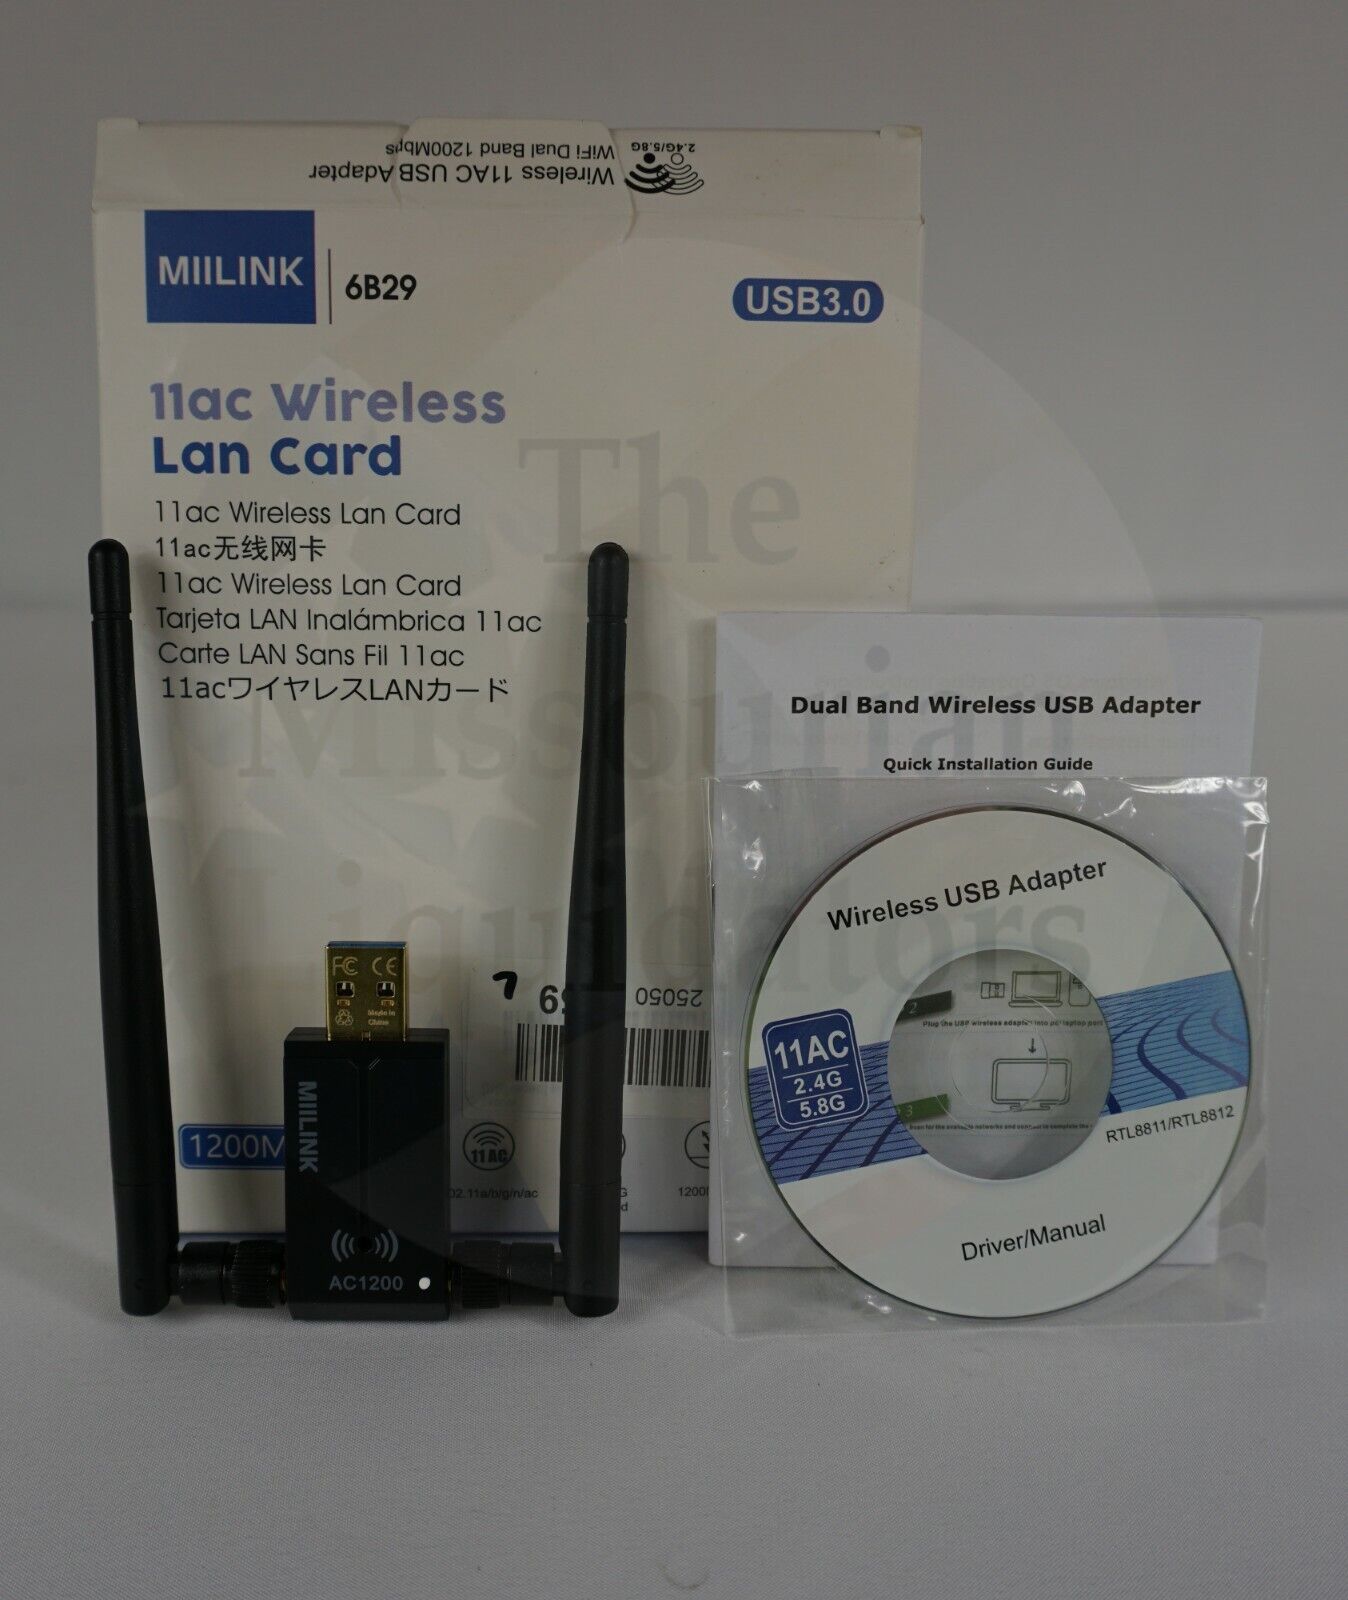 MiiLink Wireless USB 3.0 WiFi Adapter for PC 1200Mbps Dual Band 2.4GHz/5GHz